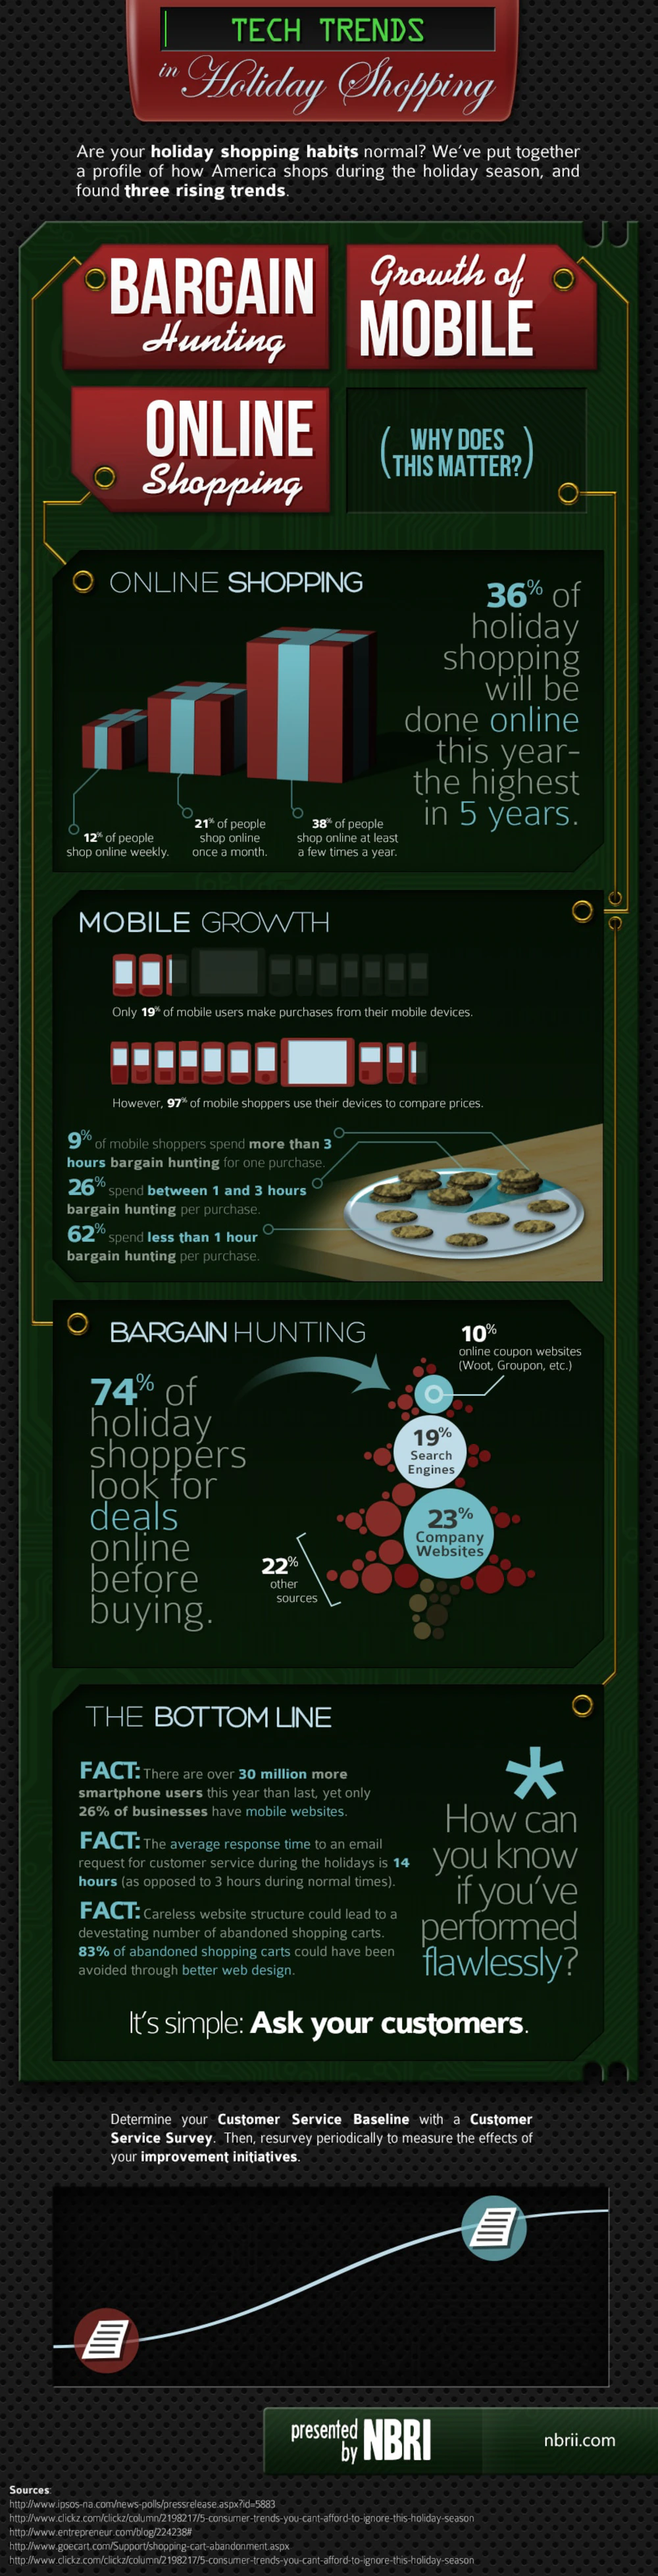 Tech Trends in Holiday Shopping infographic